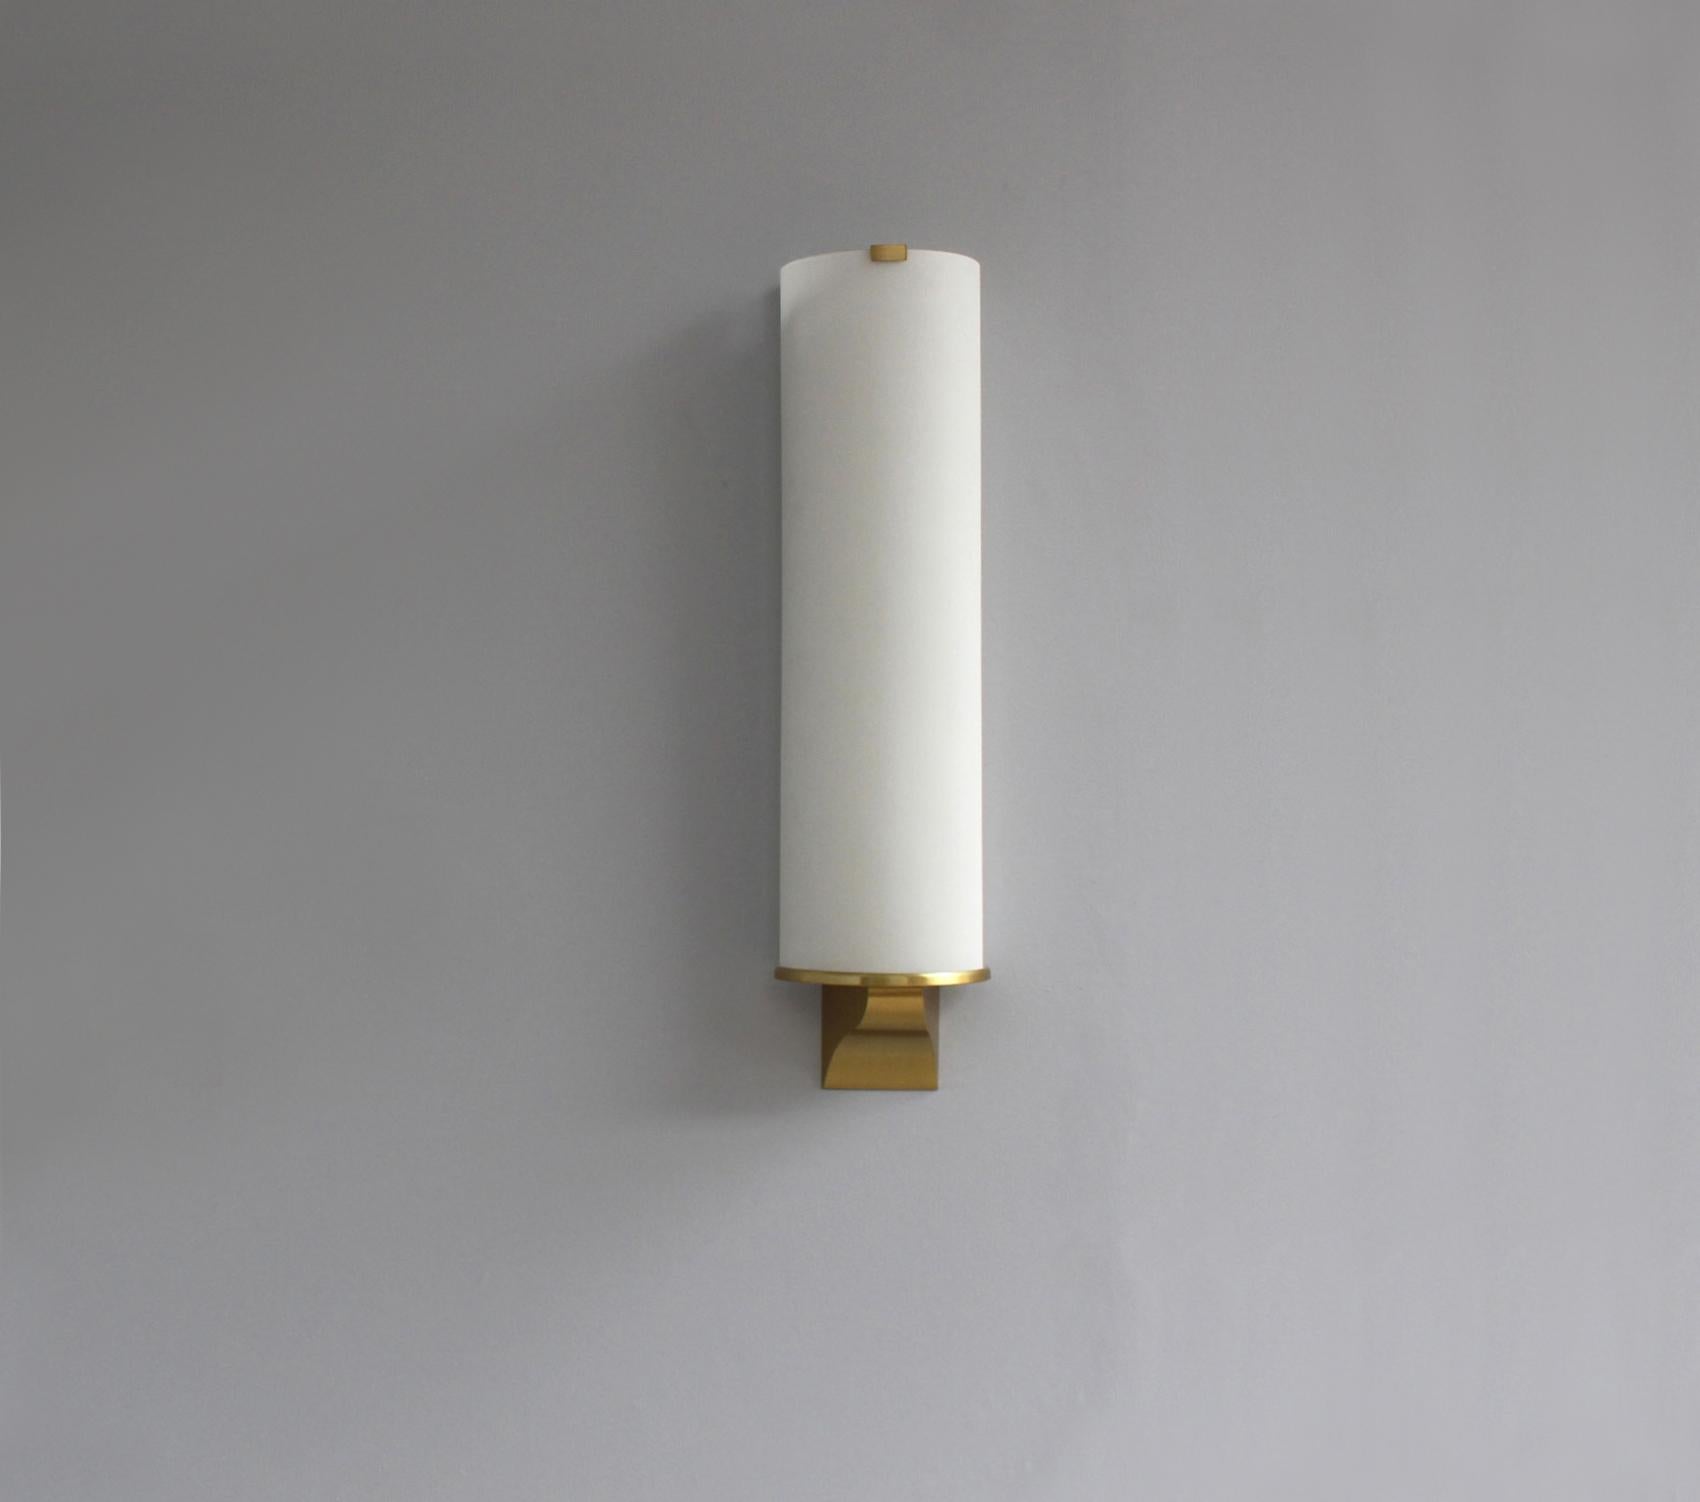 Fine French Art Deco semi cylinder shape wall light by Jean Perzel with a white frosted optical glass supported by a bronze mount.
